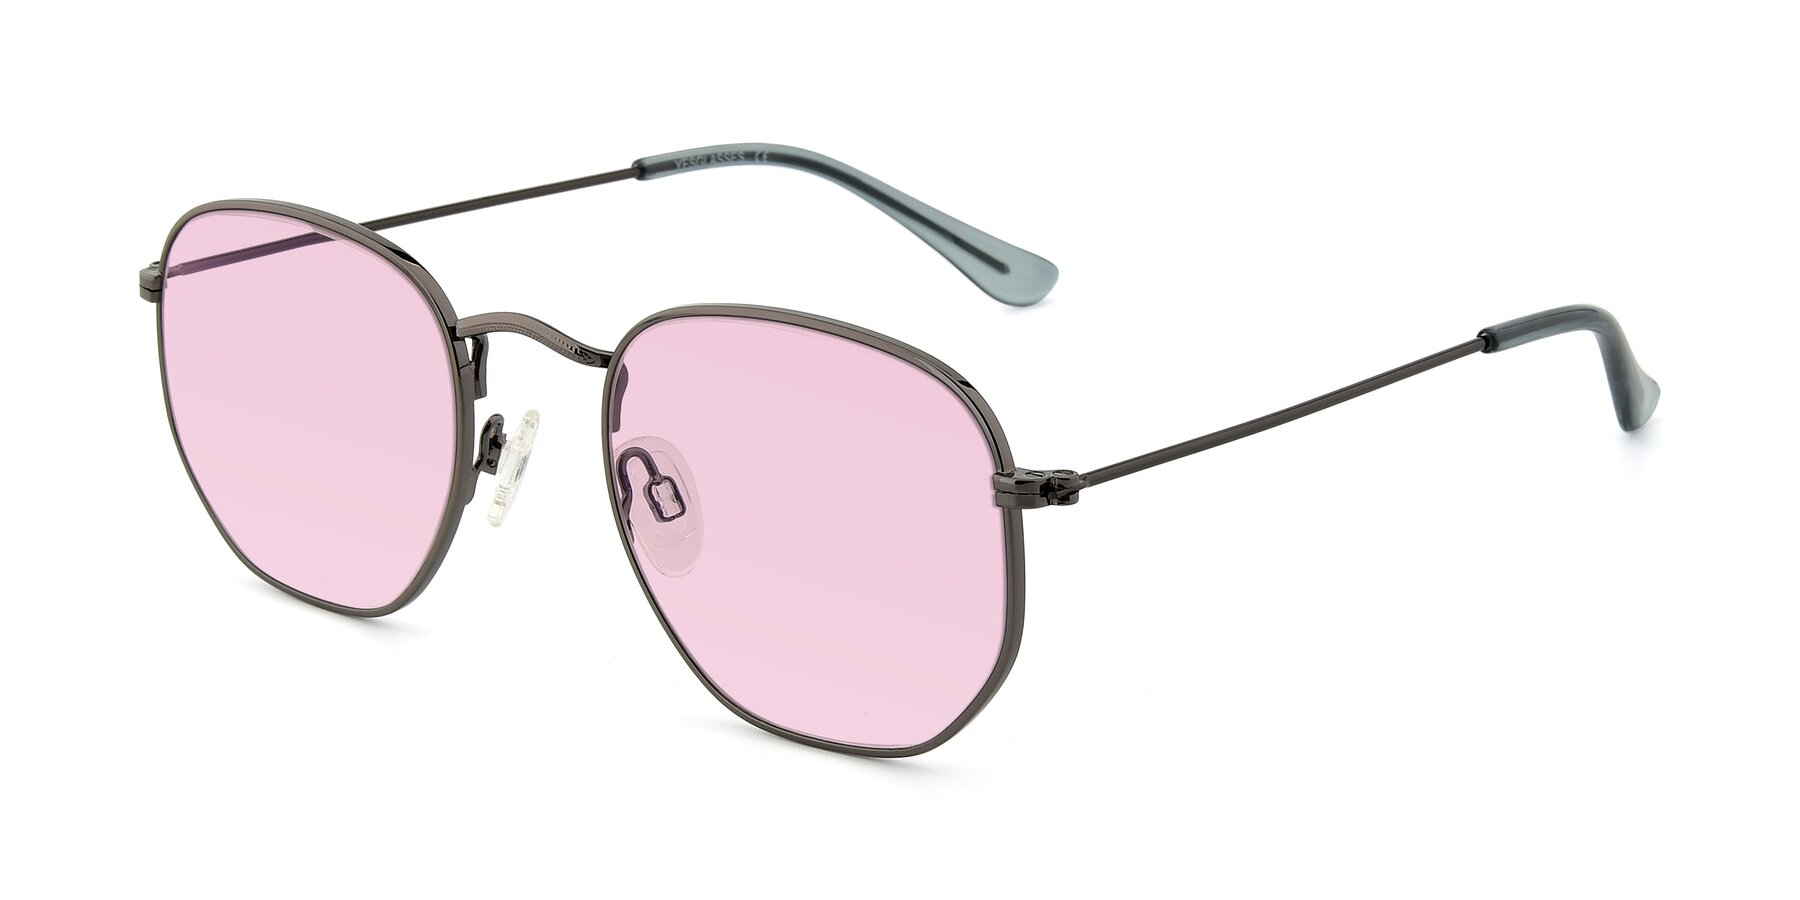 Angle of SSR1944 in Grey with Light Pink Tinted Lenses